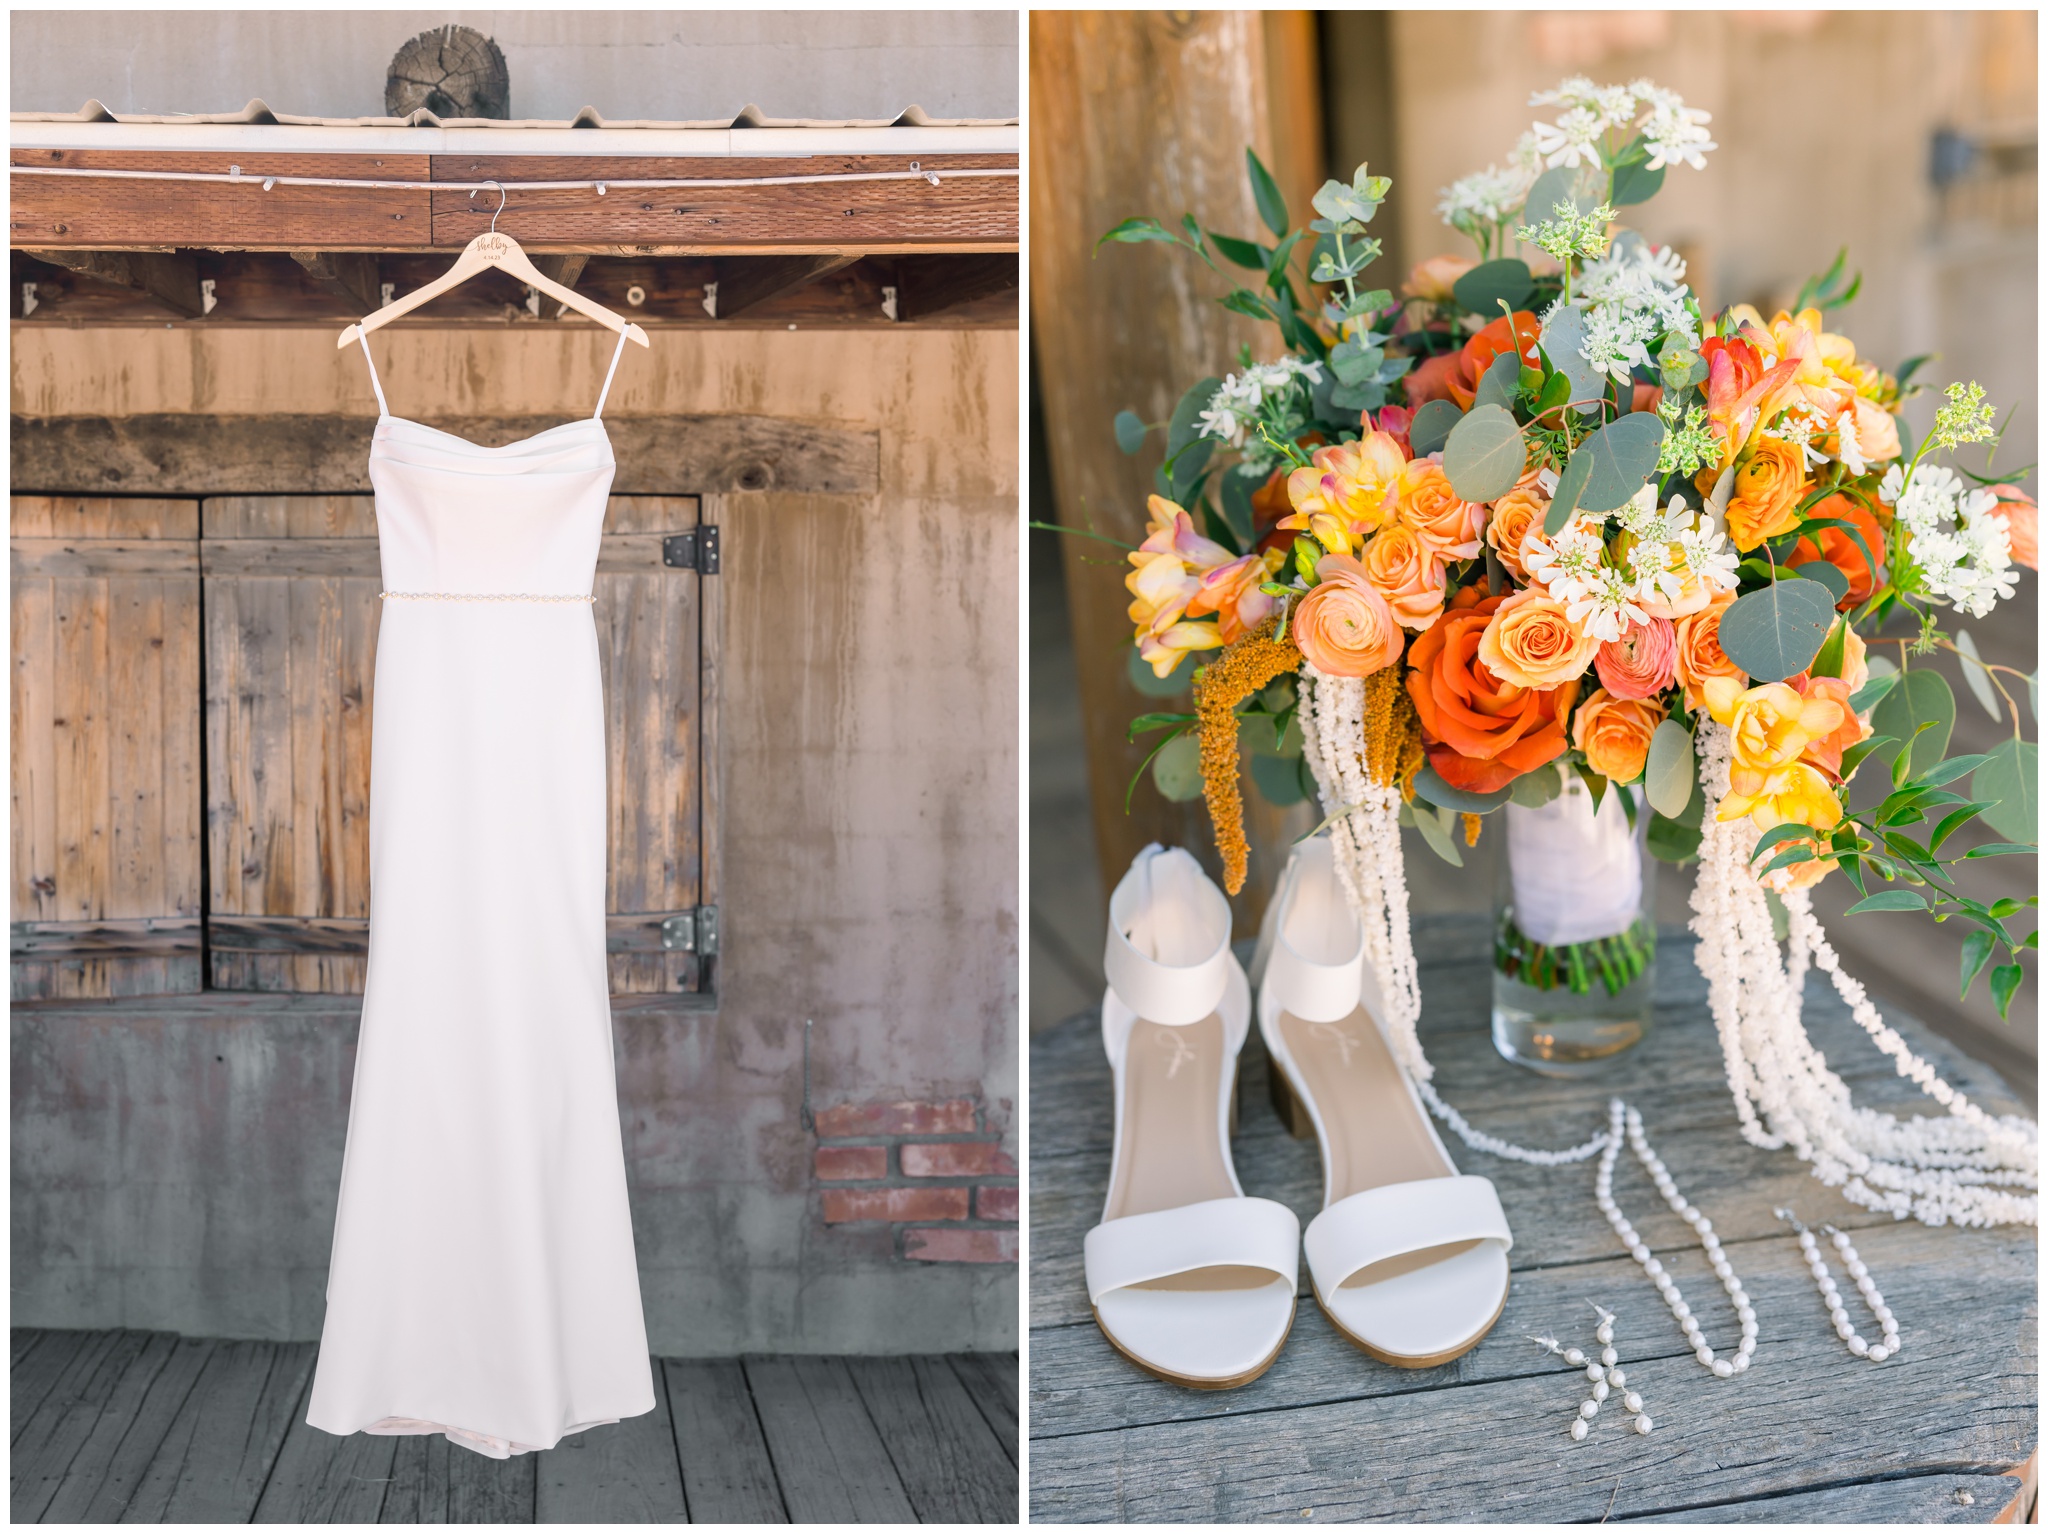 Hanging wedding dress, shoes, wedding bouquet and pearls